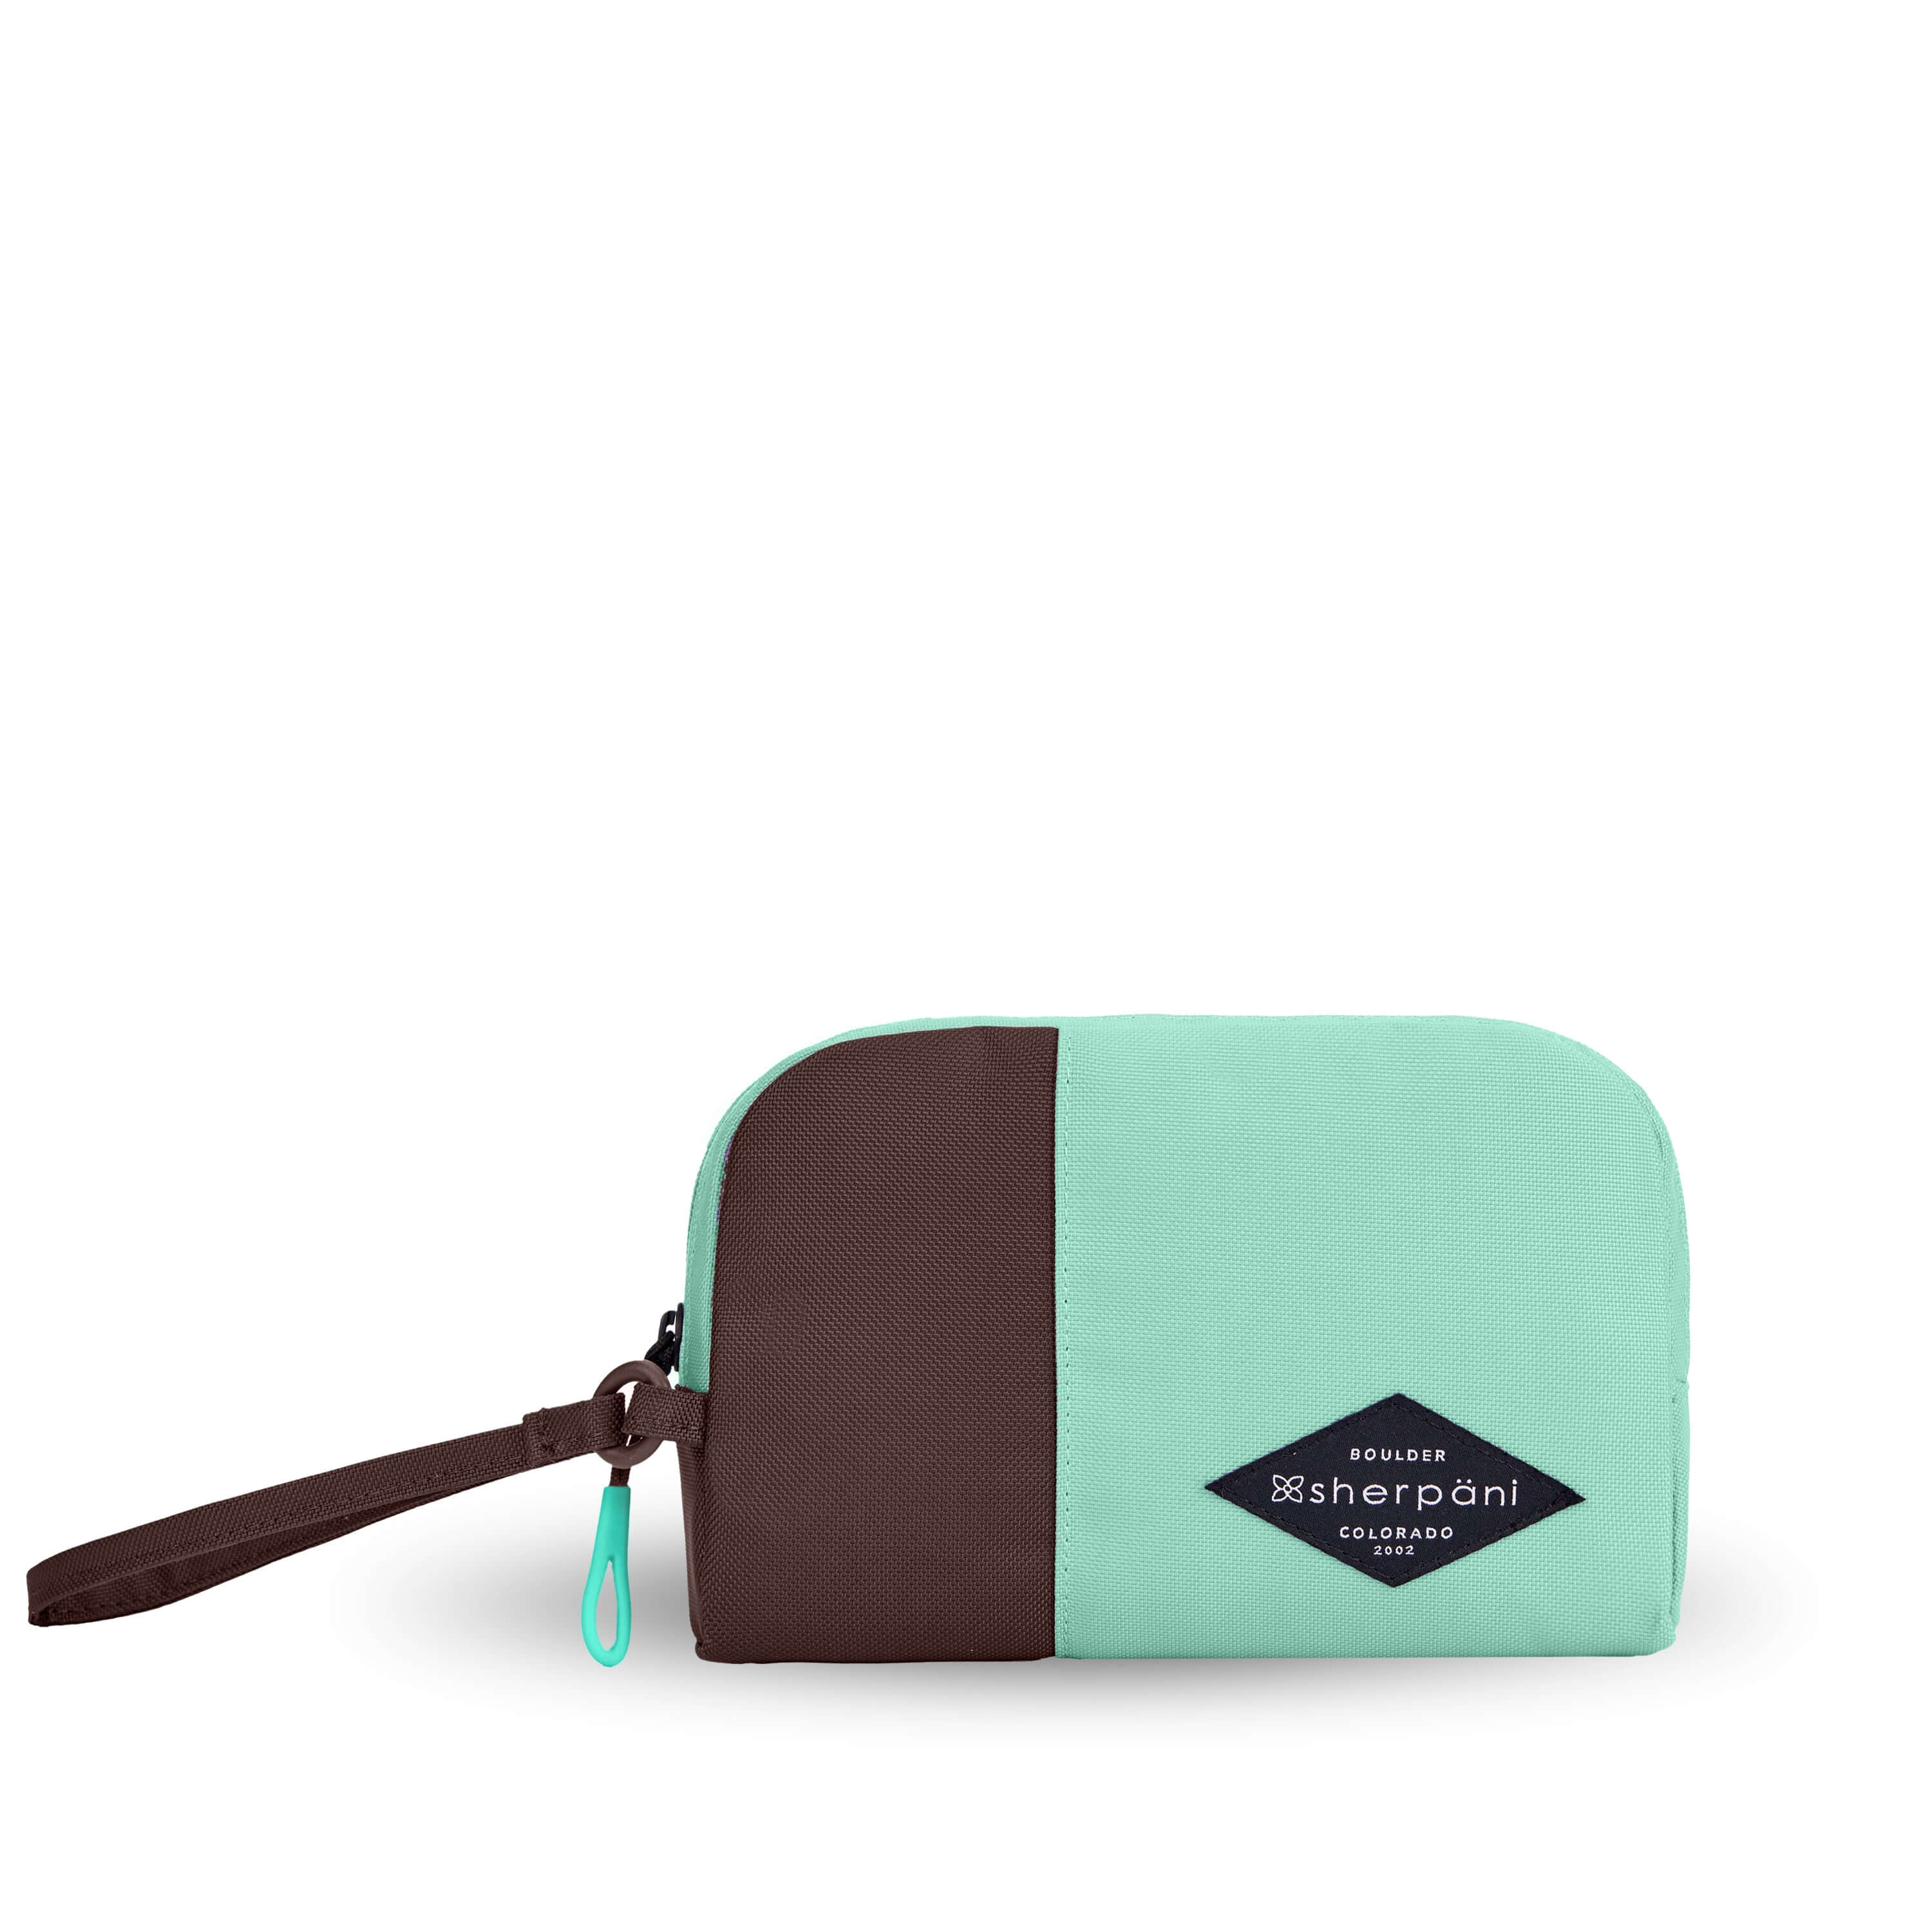 Flat front view of Sherpani travel accessory, the Jolie in Seagreen, in medium size. The pouch is two-toned in light green and brown. It features a brown wristlet strap and an easy-pull zipper accented in light green.